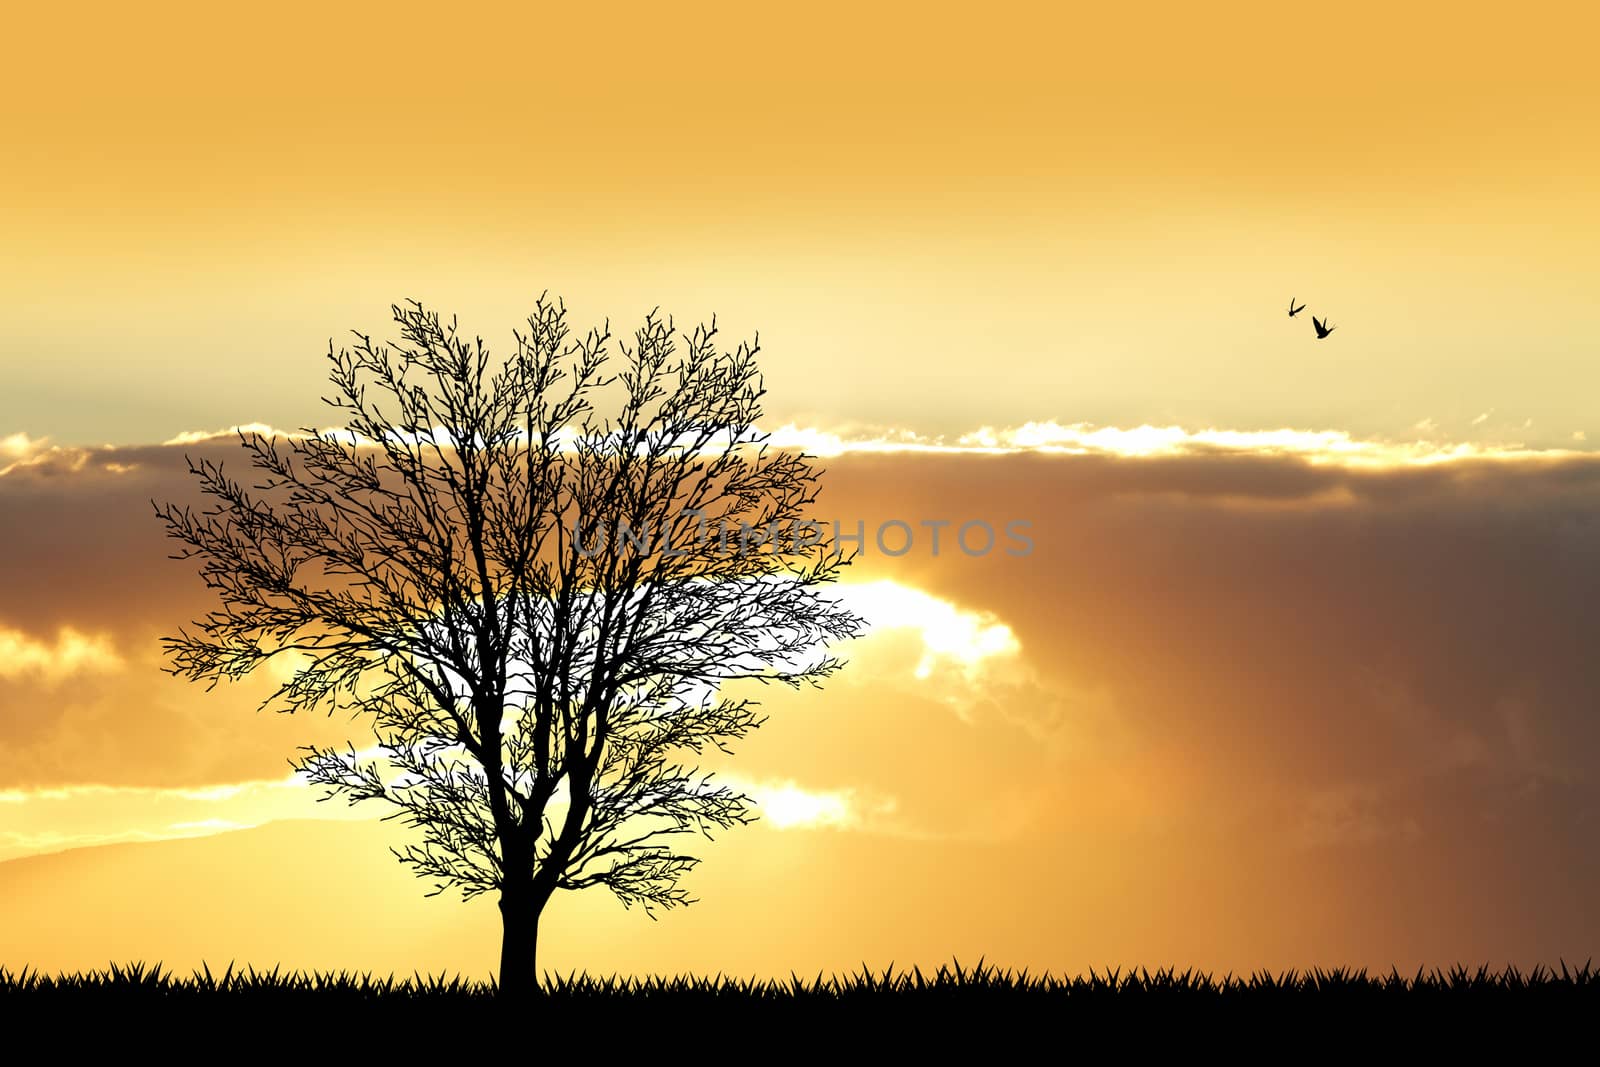 tree silhouette at sunset by adrenalina